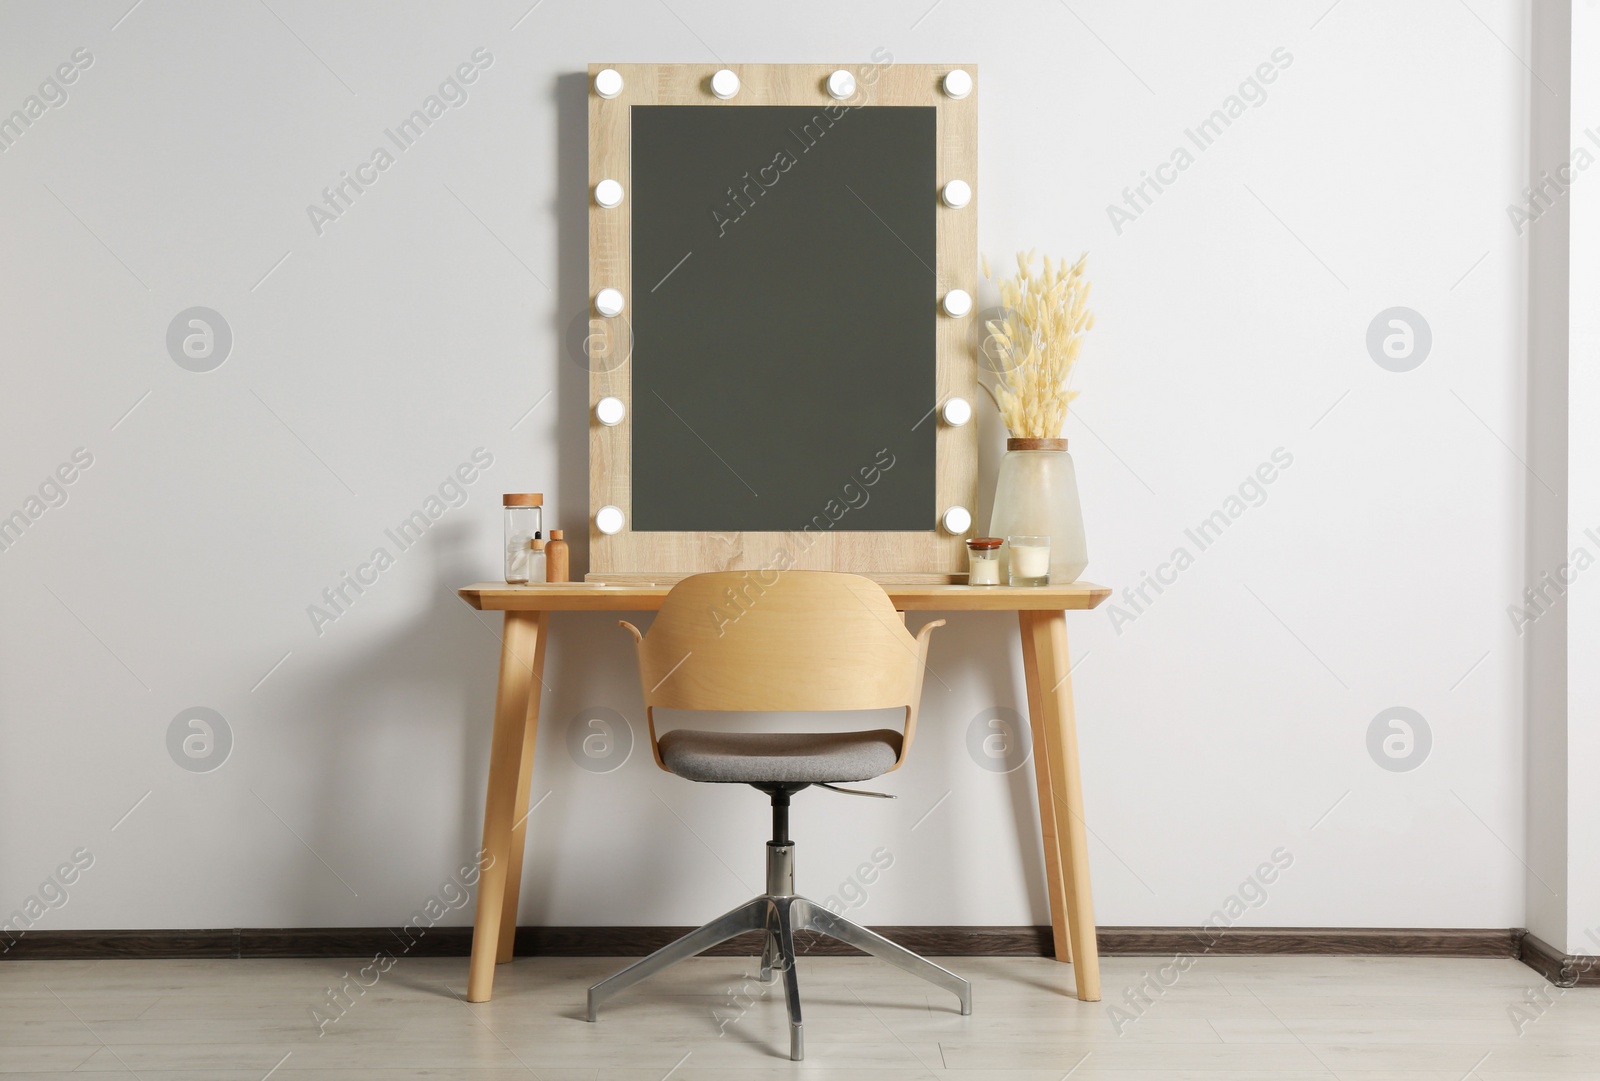 Photo of Dressing table with stylish mirror, dried reeds and other decorative elements. Interior design